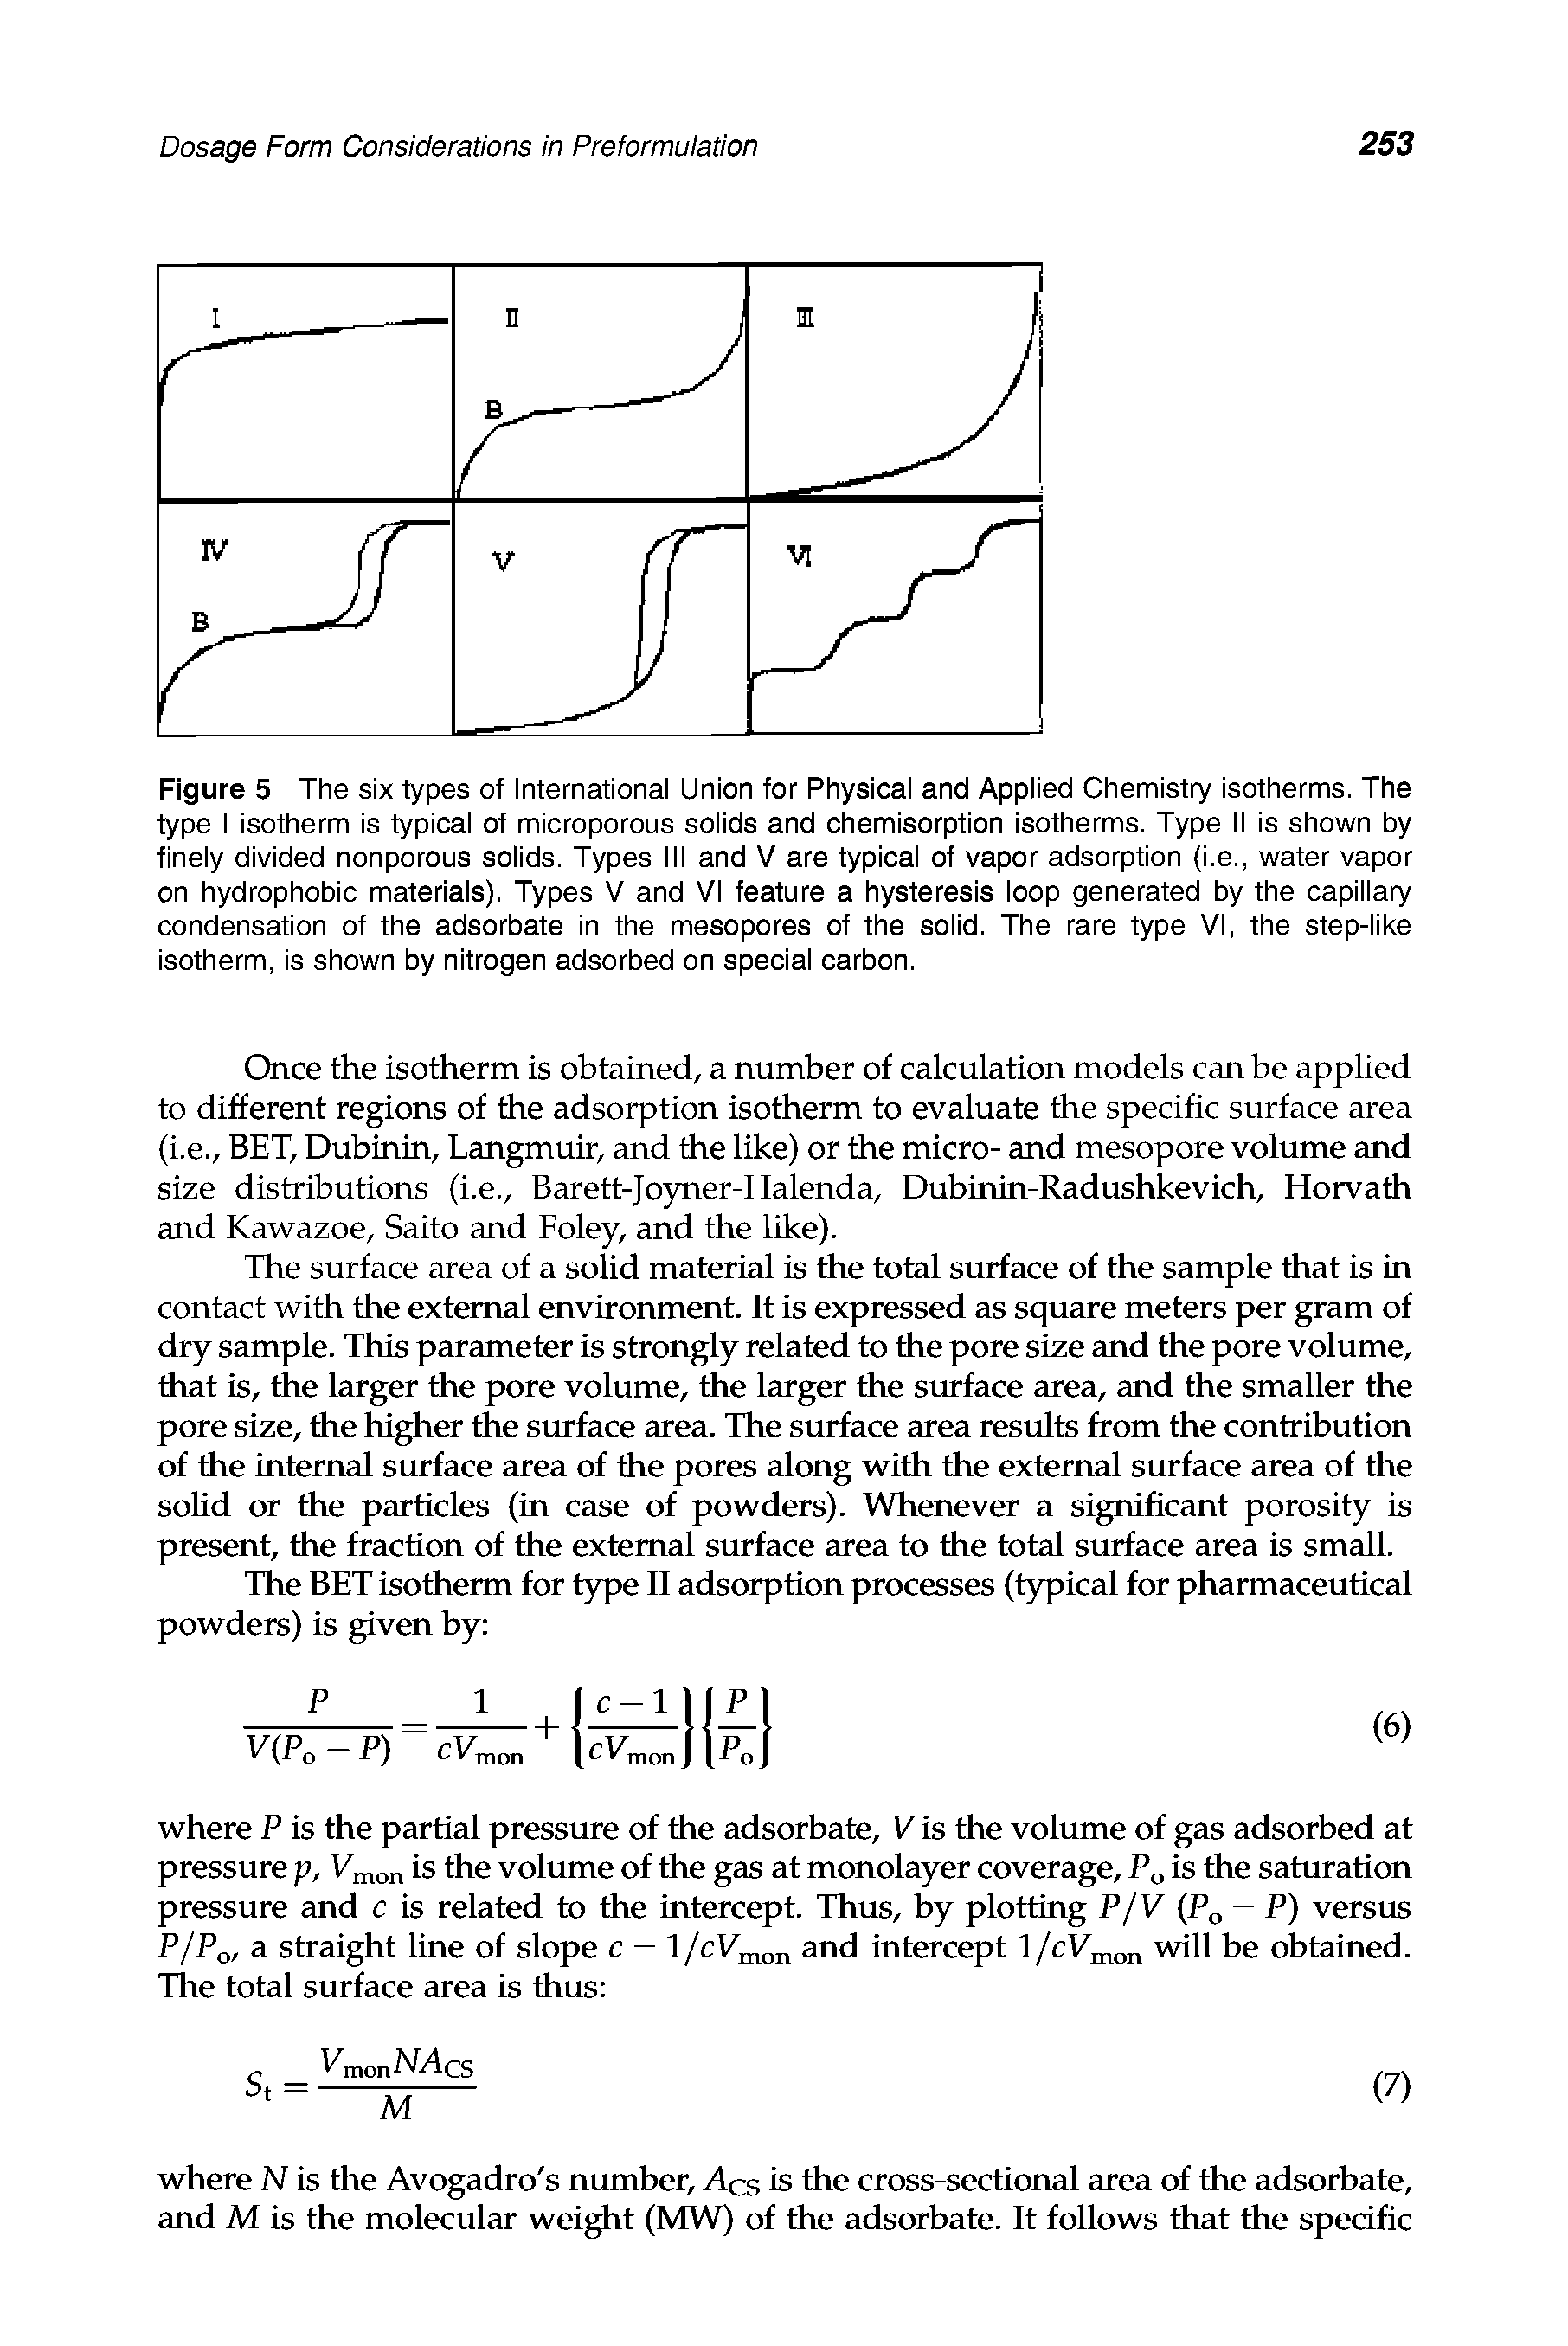 Figure 5 The six types of International Union for Physical and Applied Chemistry isotherms. The type I isotherm is typical of microporous solids and chemisorption isotherms. Type II is shown by finely divided nonporous solids. Types III and V are typical of vapor adsorption (i.e., water vapor on hydrophobic materials). Types V and VI feature a hysteresis loop generated by the capillary condensation of the adsorbate in the mesopores of the solid. The rare type VI, the step-like isotherm, is shown by nitrogen adsorbed on special carbon.